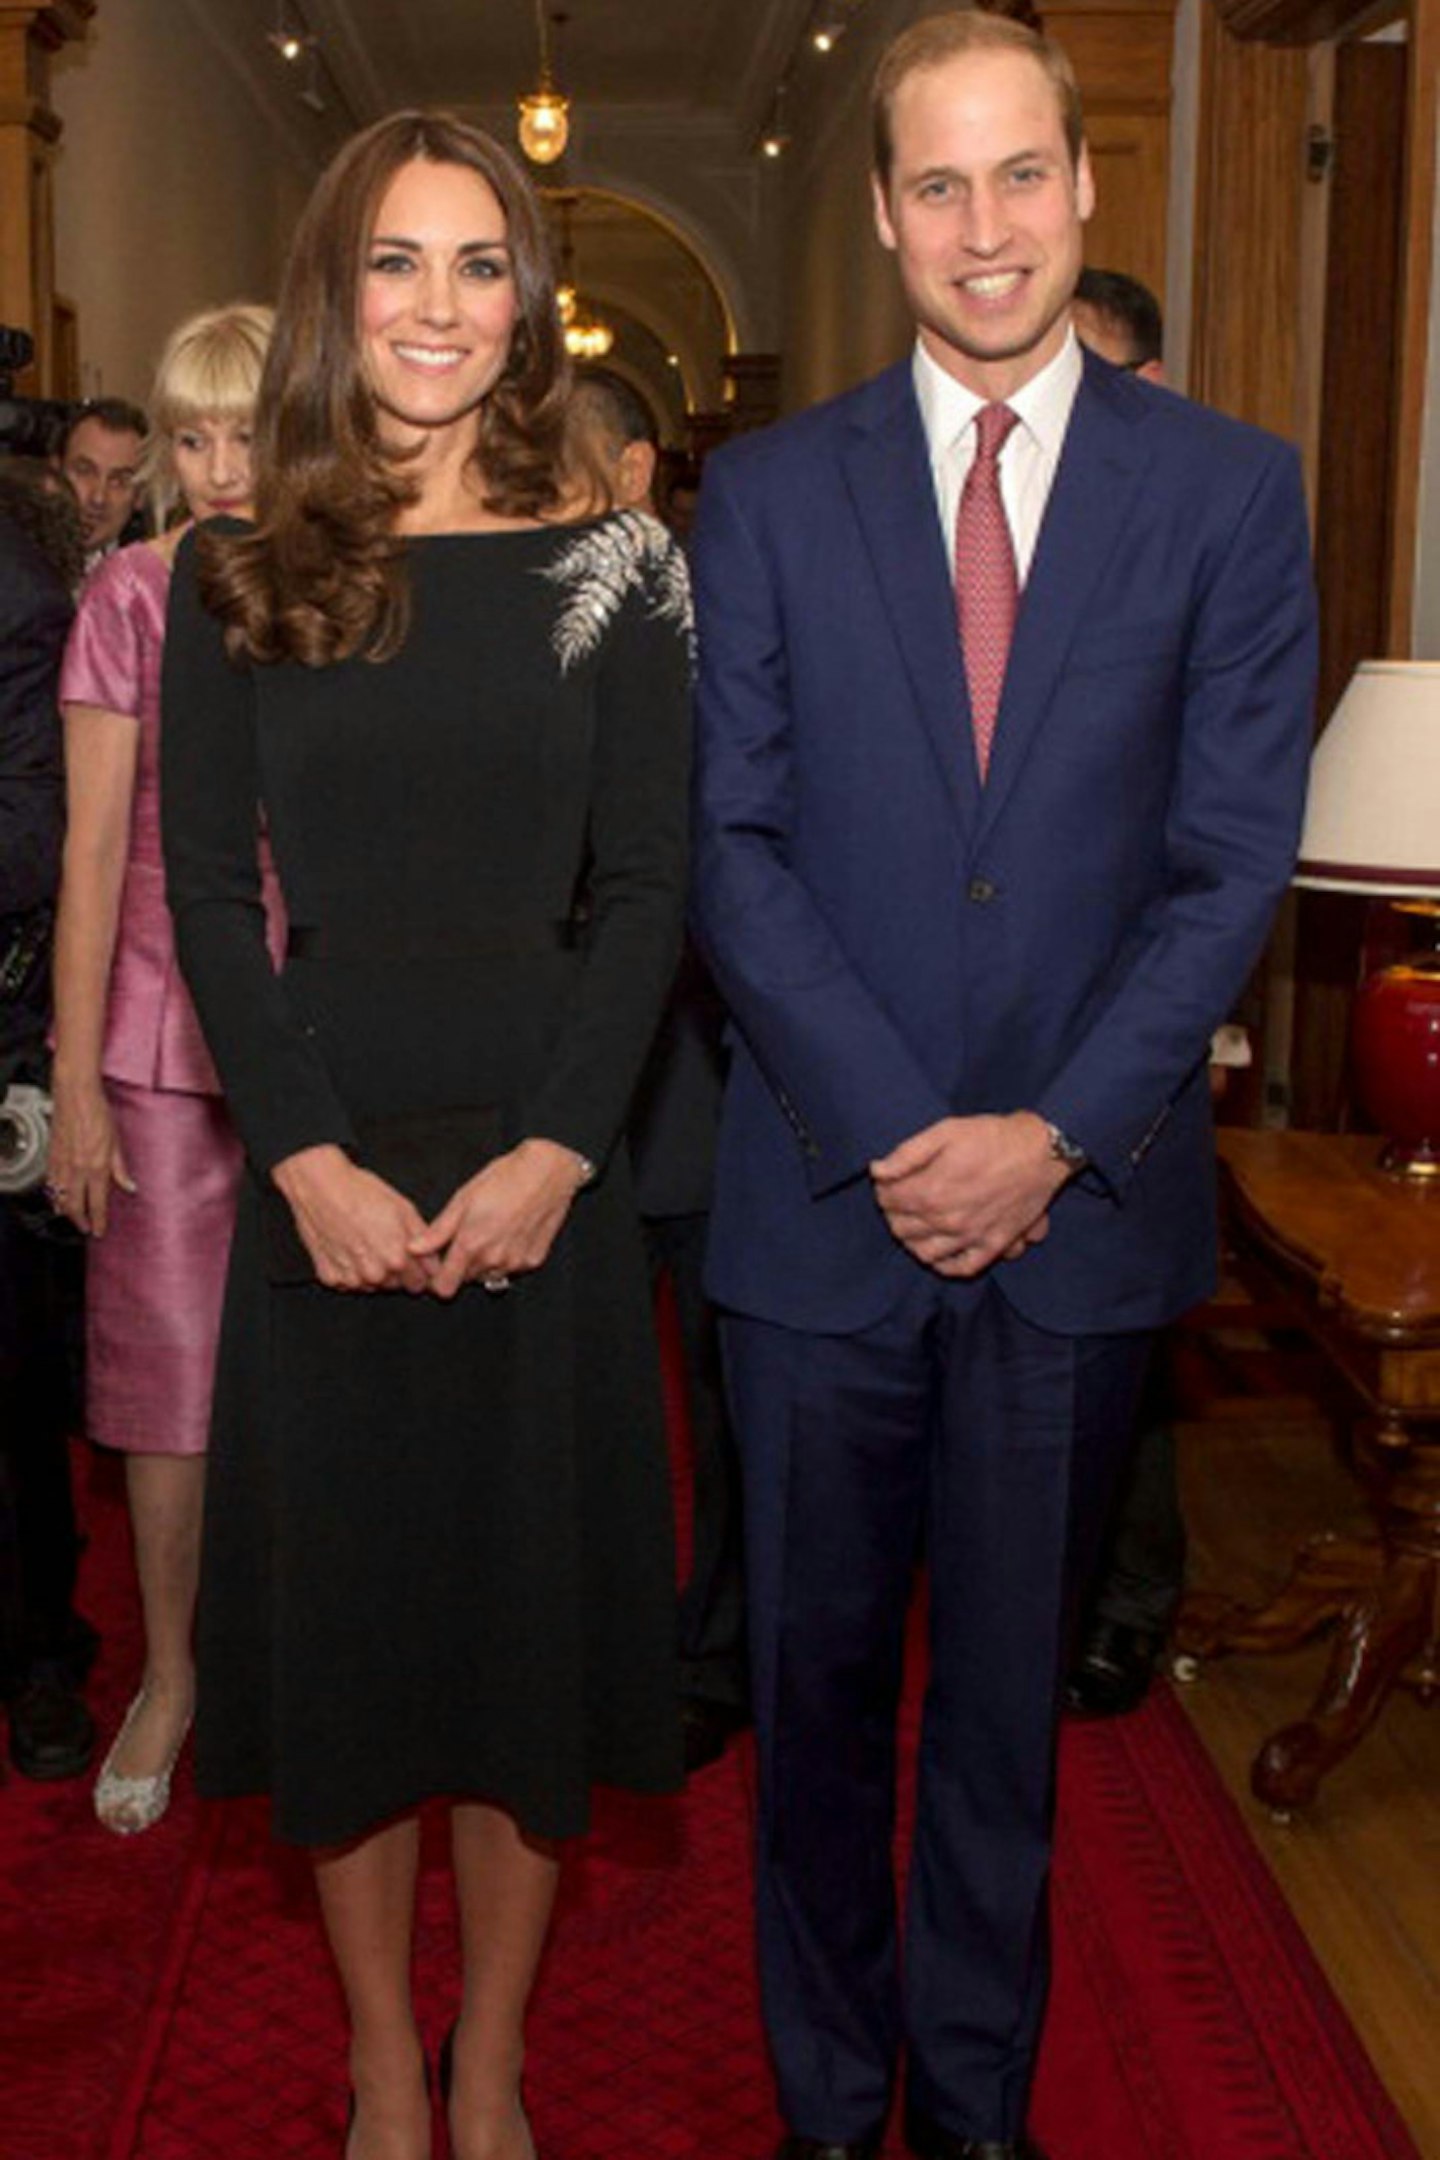 54-53. Duke and Duchess looking proper at a state reception at Government House in Wellington, New Zealand.